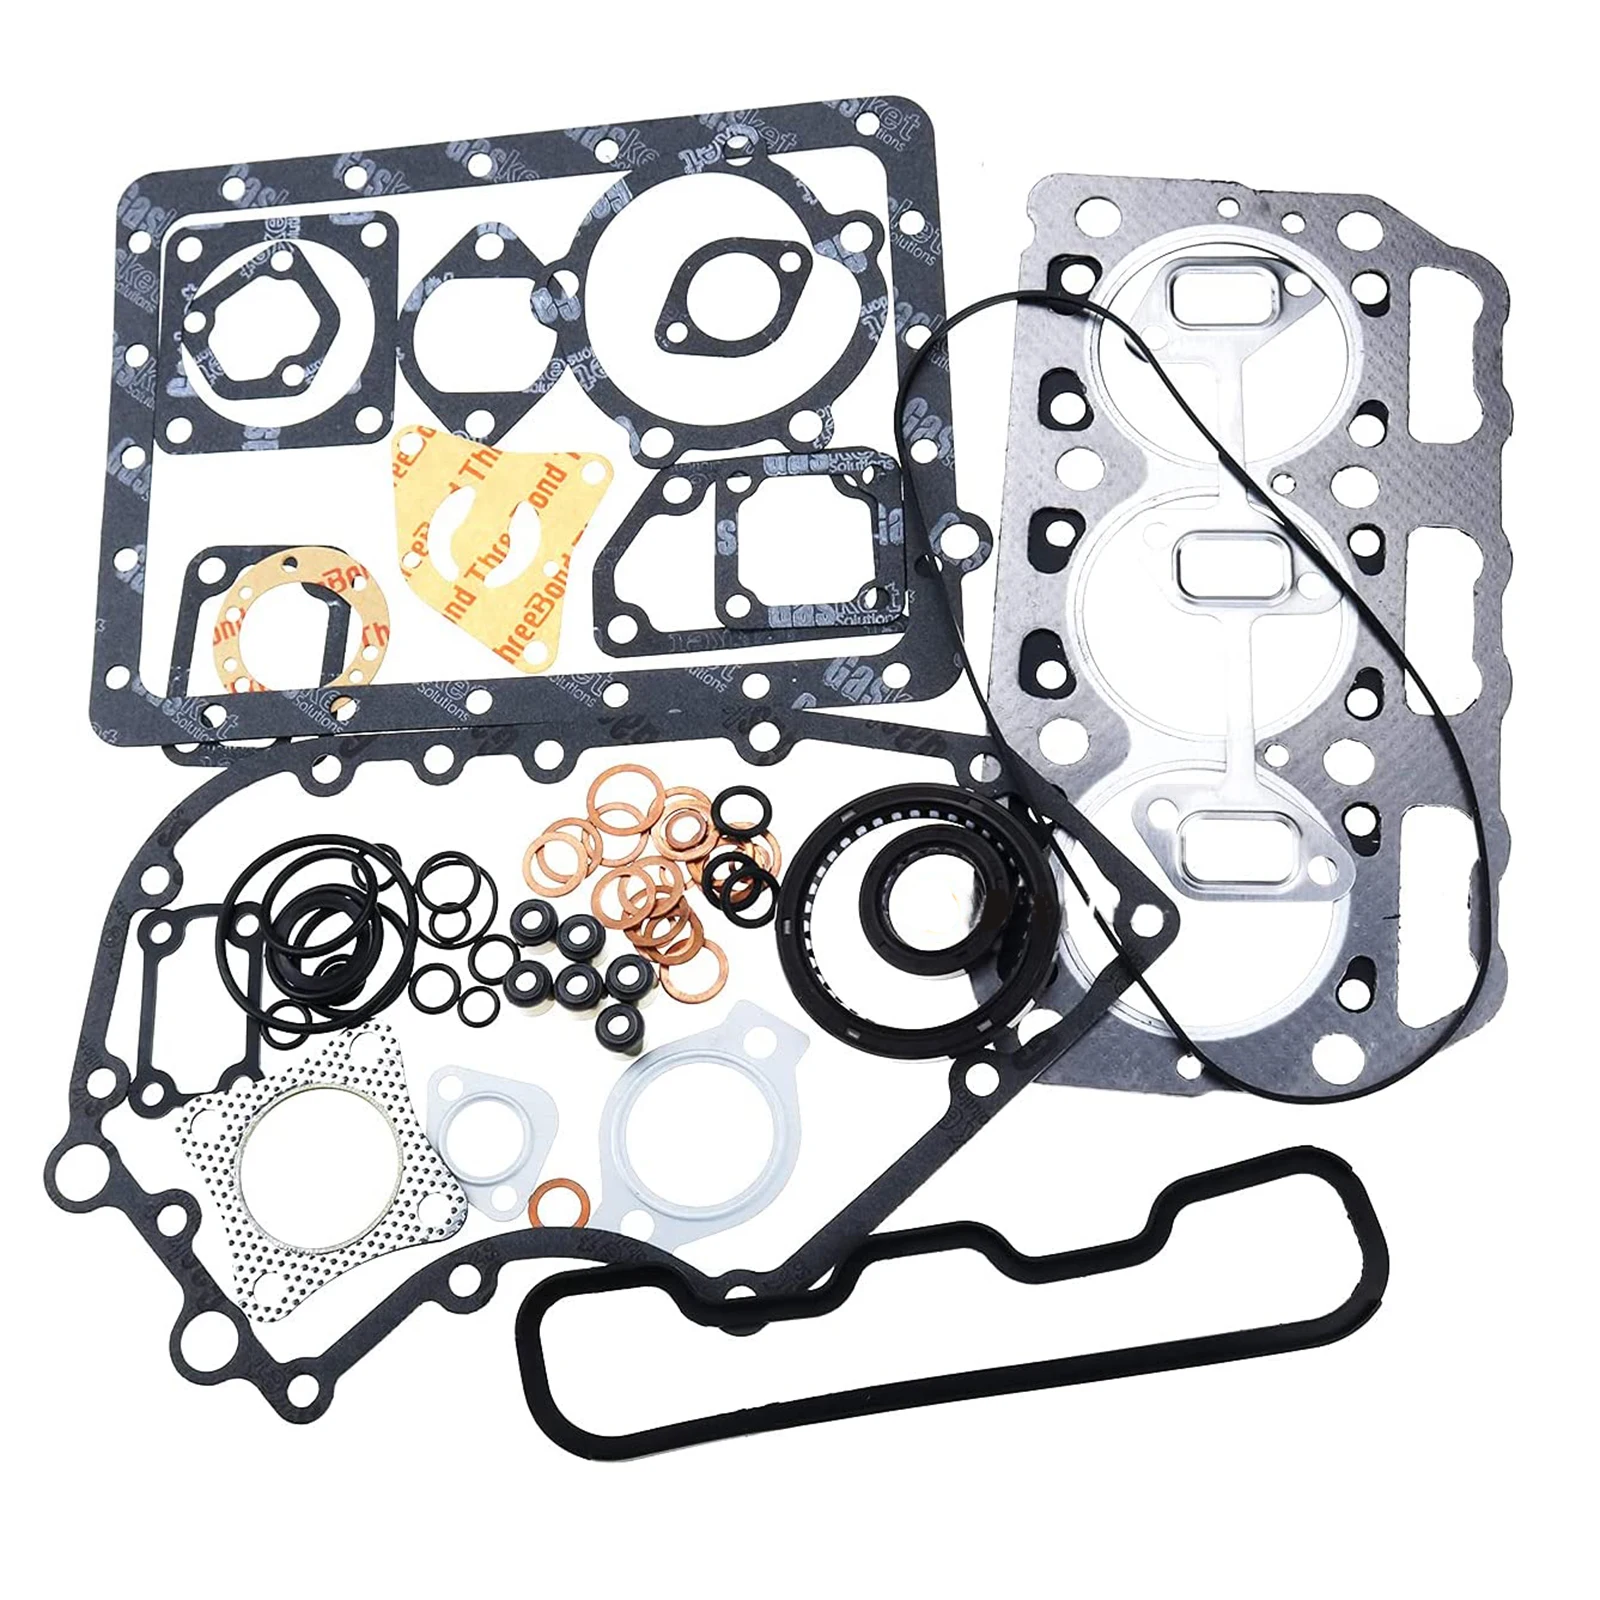 

New Full Overhaul Gasket Kit 721454-92605 Application for Yanmar Tractor 3T72SB 3T72SA-B 3T72H-N 3T72 Engine Aftermarket Parts